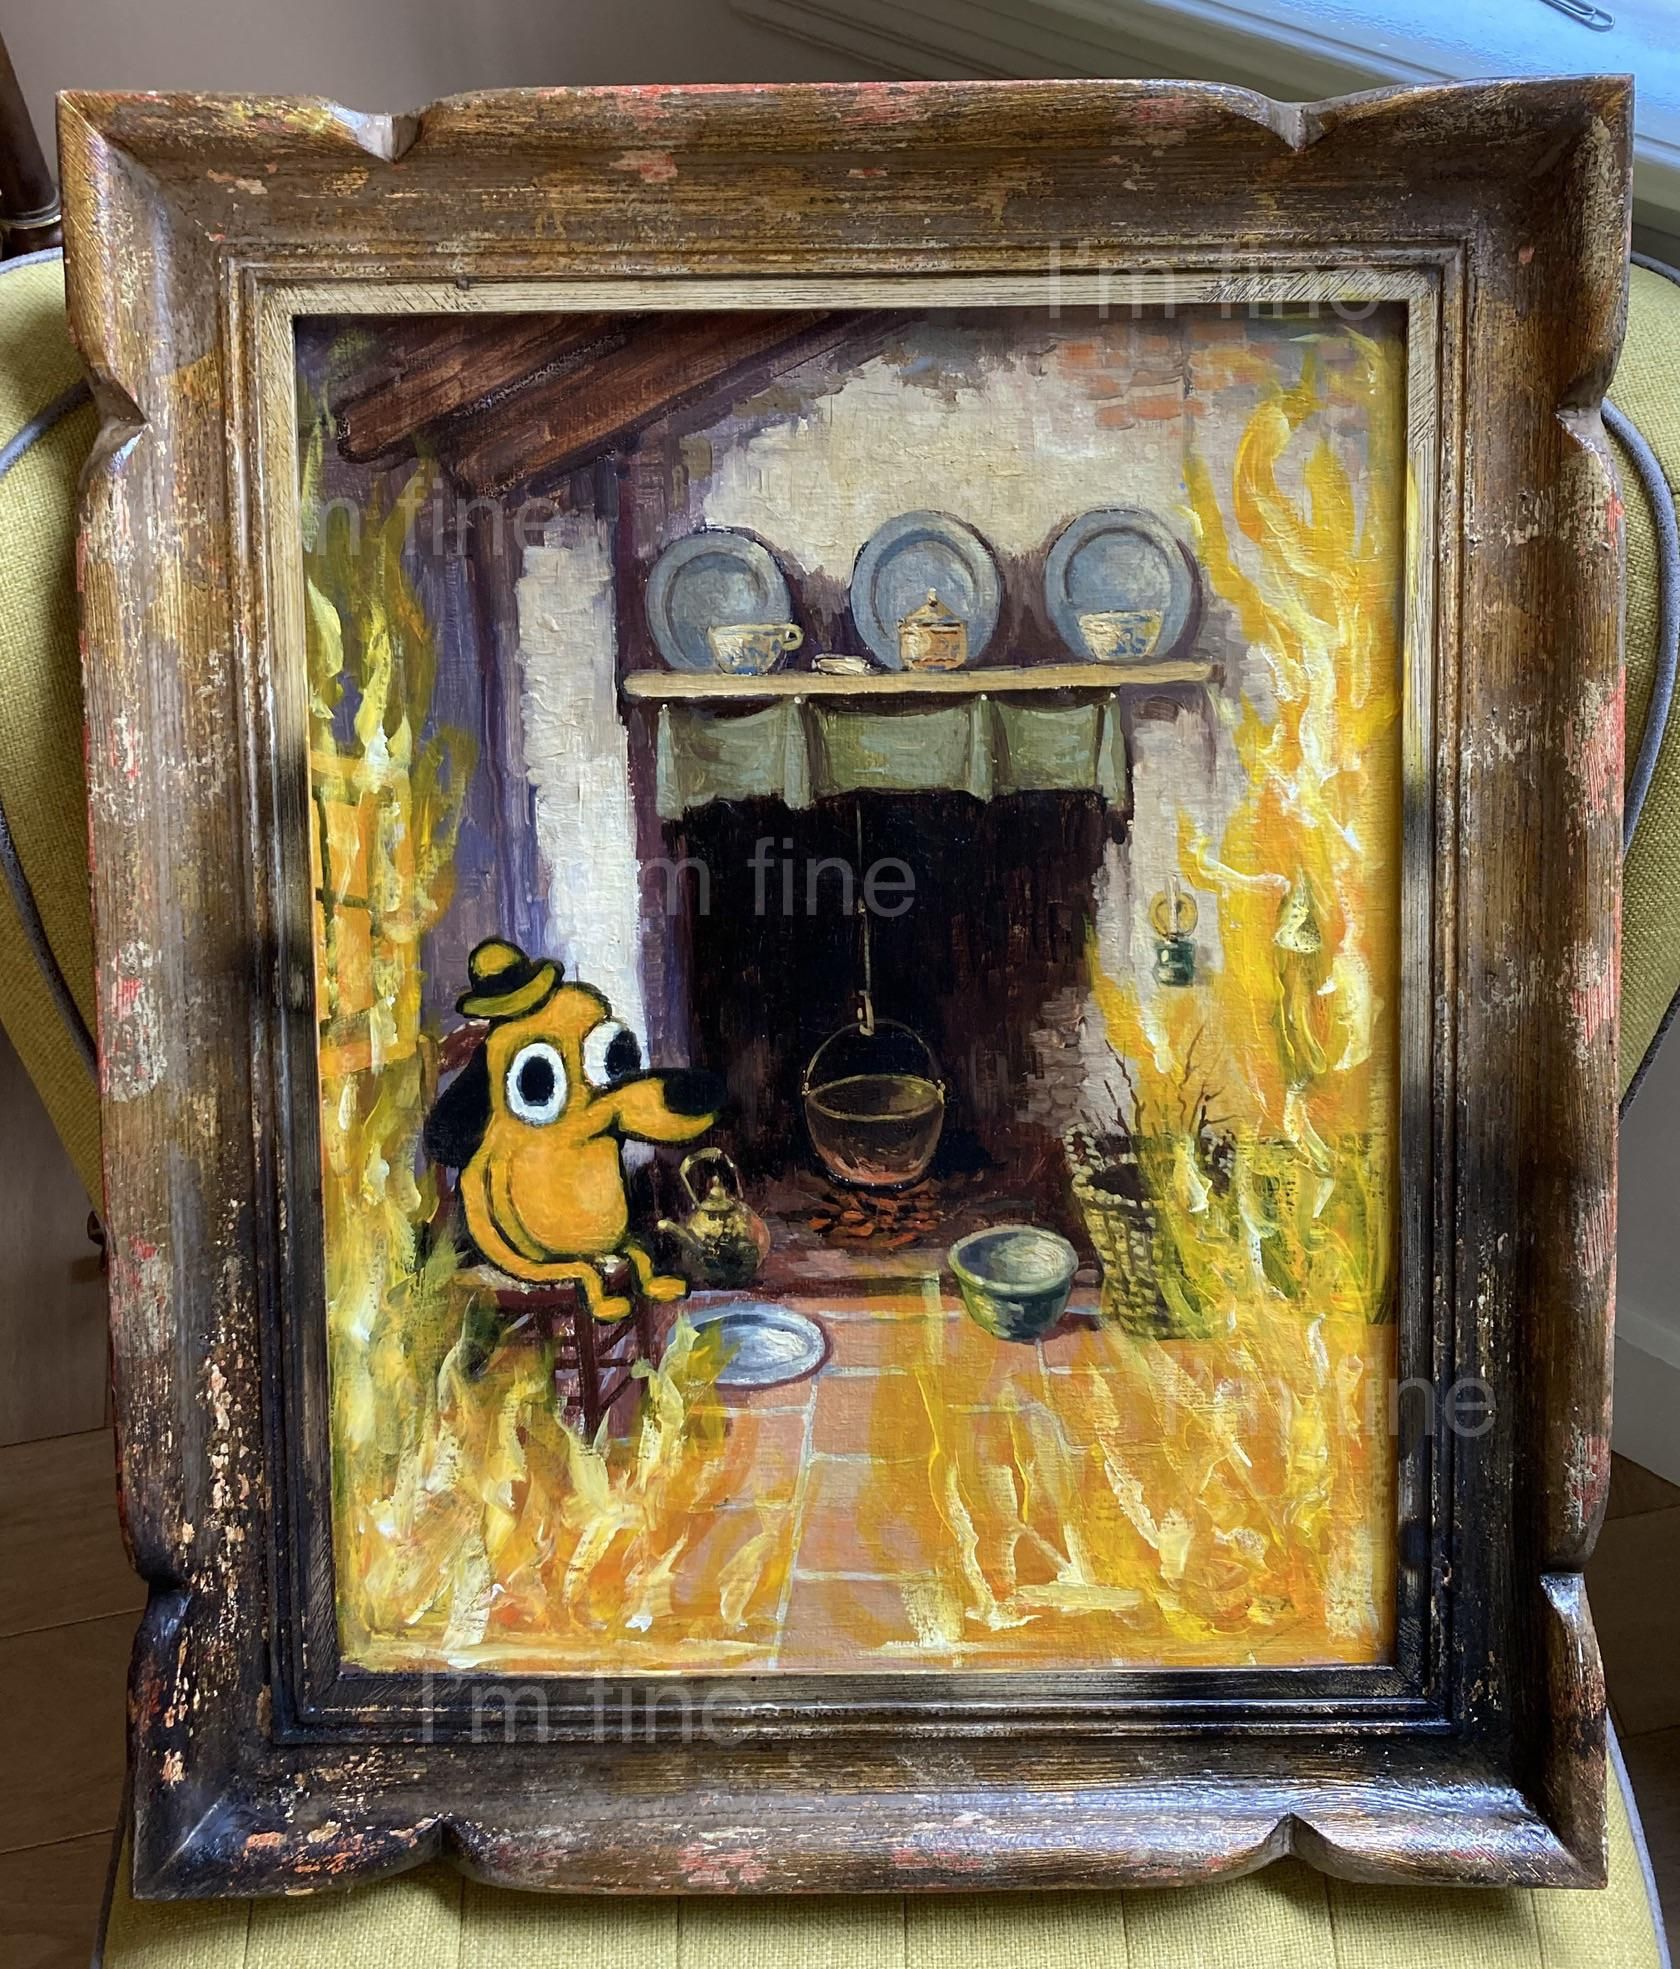 “I’m fine” on a thrifted painting.